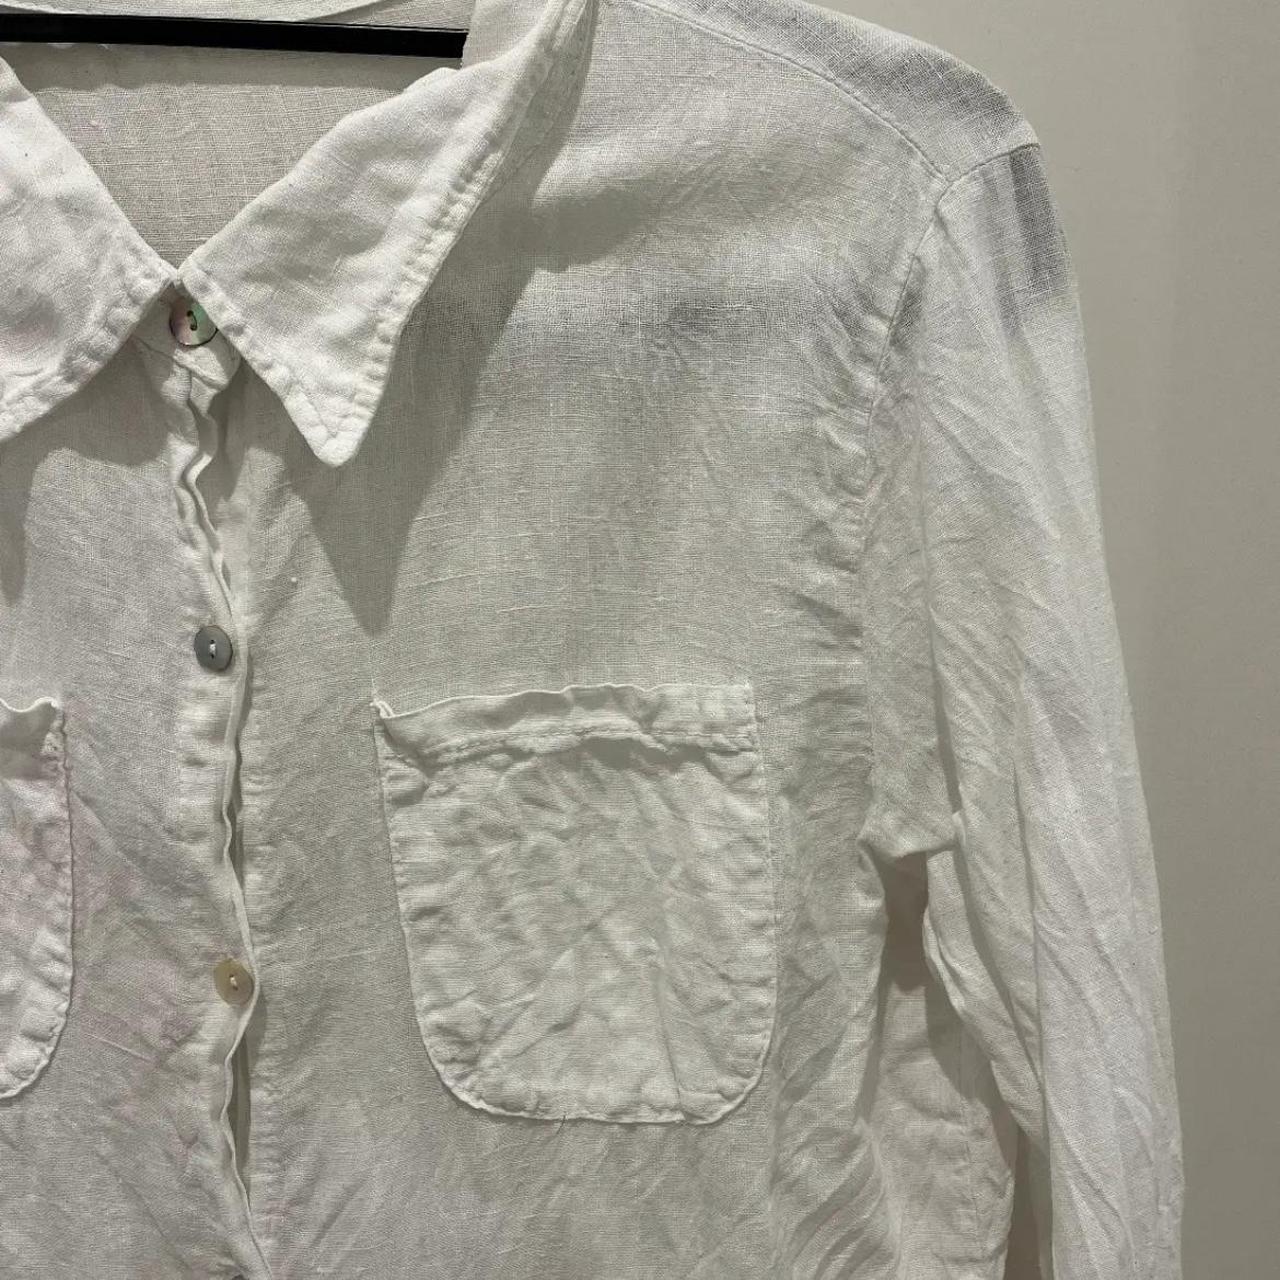 Made in Italy white linen shirt in size M - worn... - Depop